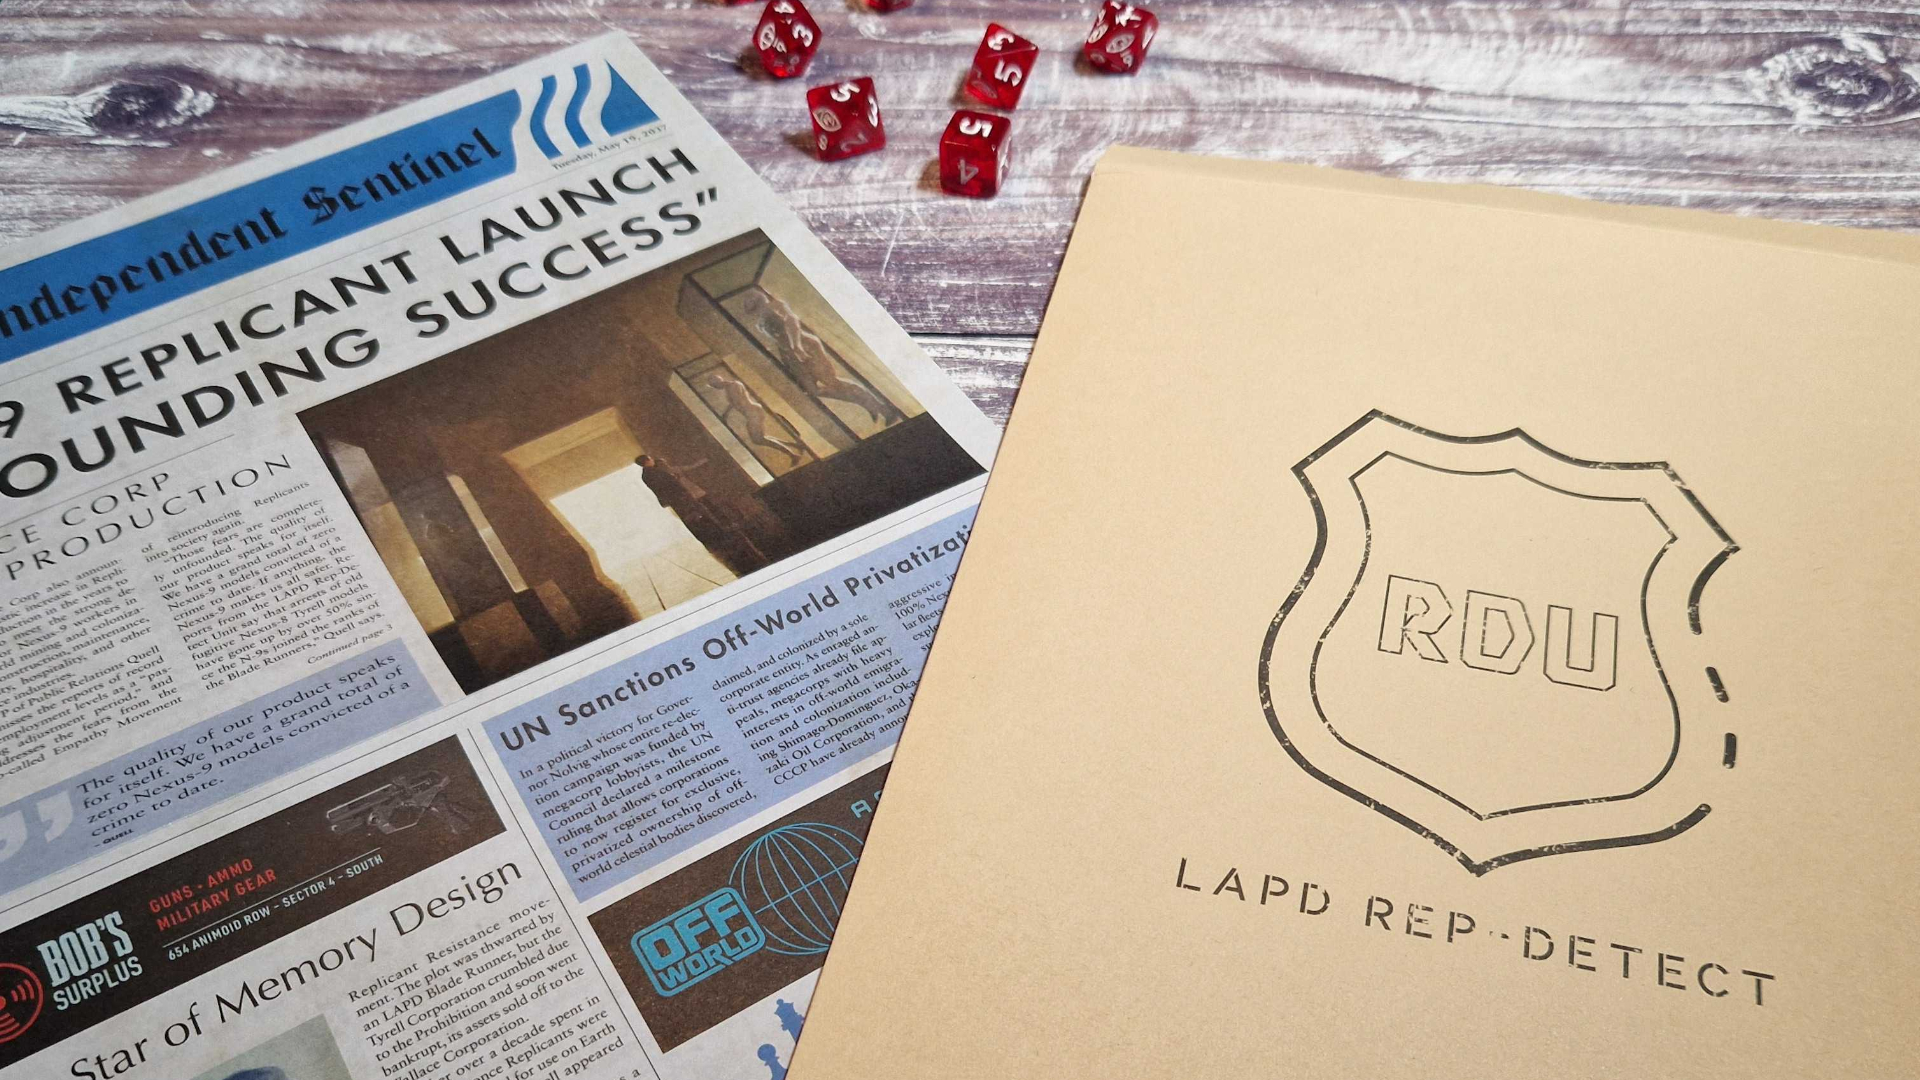 The evidence file and newspaper prop from the Blade Runner RPG on a wooden surface, along with some dice